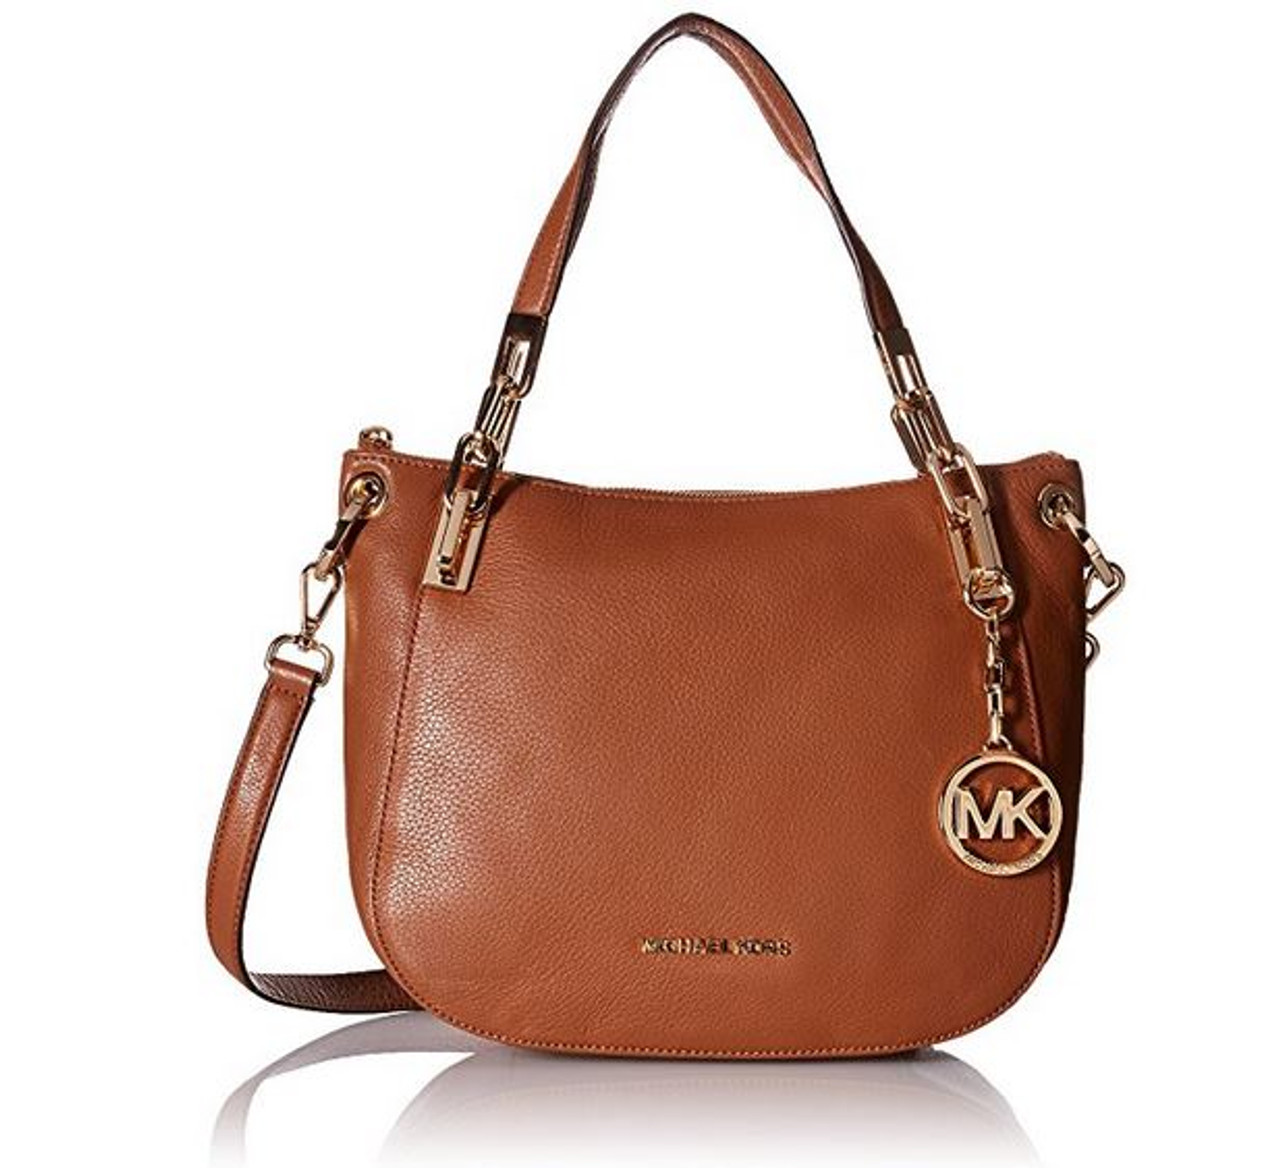 Bags, Michael Kors Mercer Large Convertible Tote Oyster